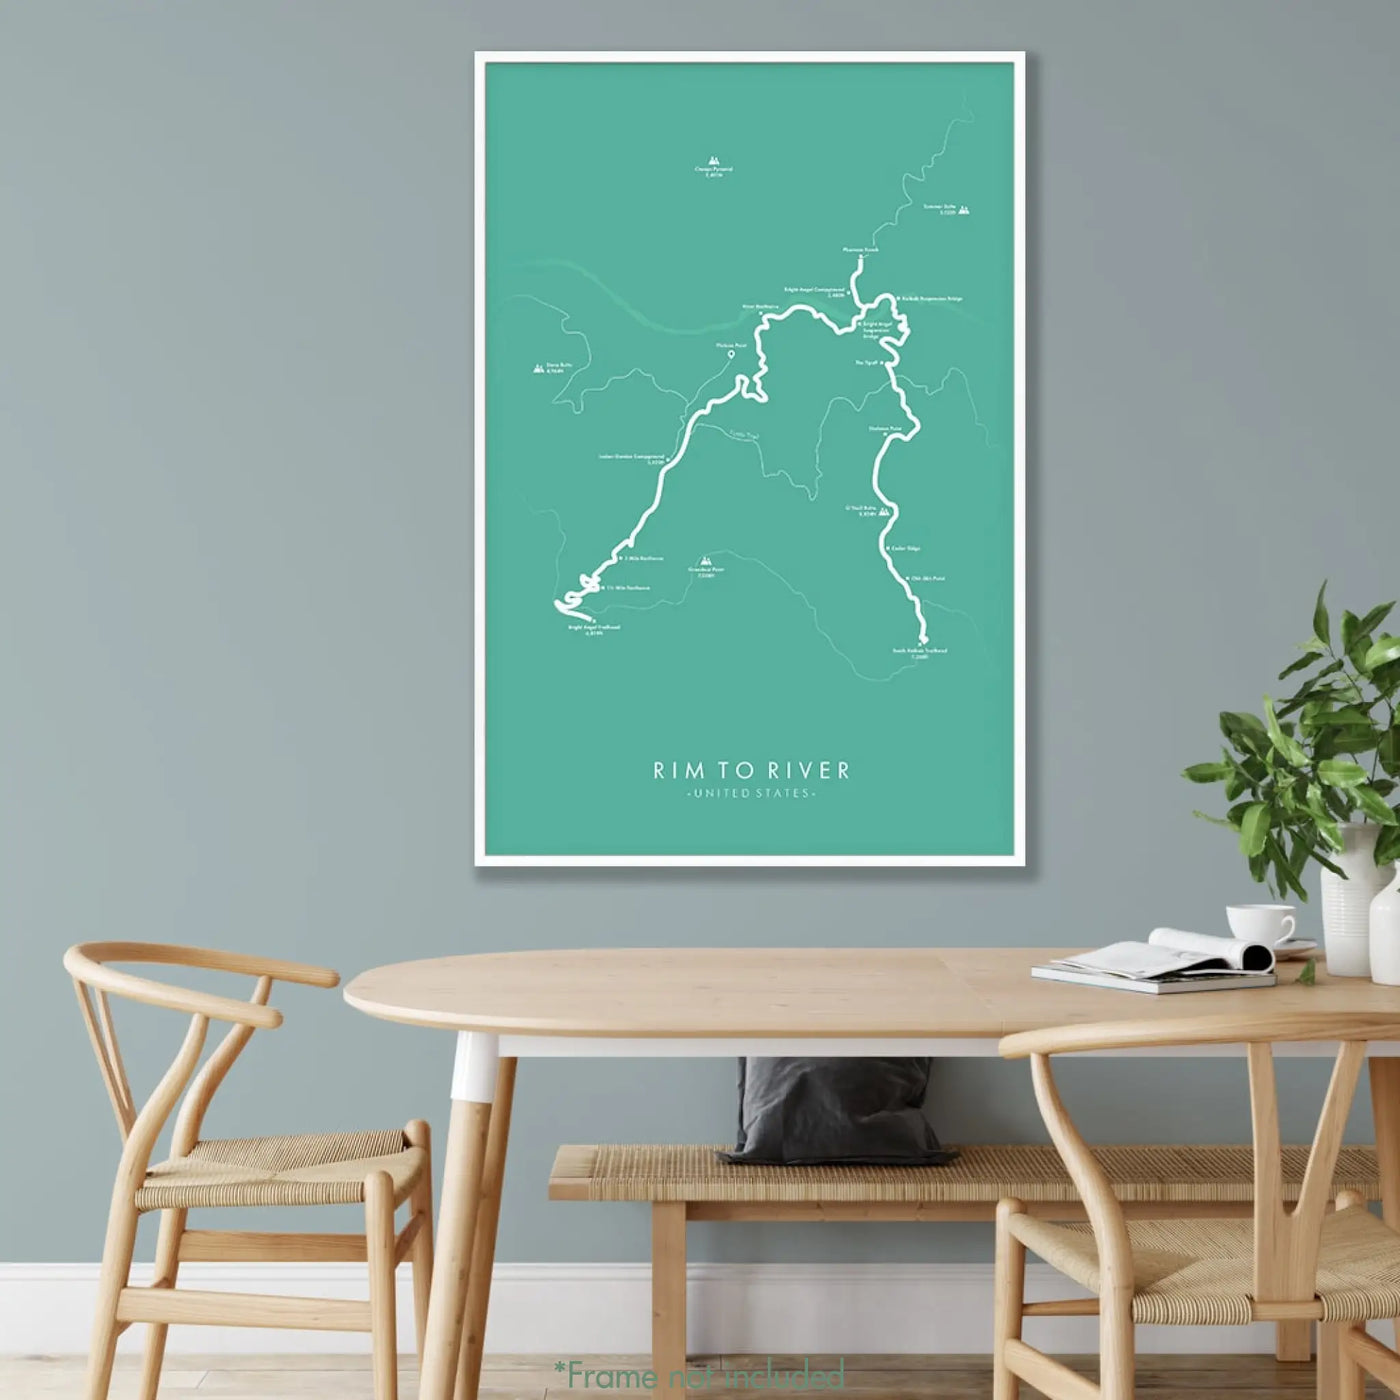 Trail Poster of Rim To River - Teal Mockup